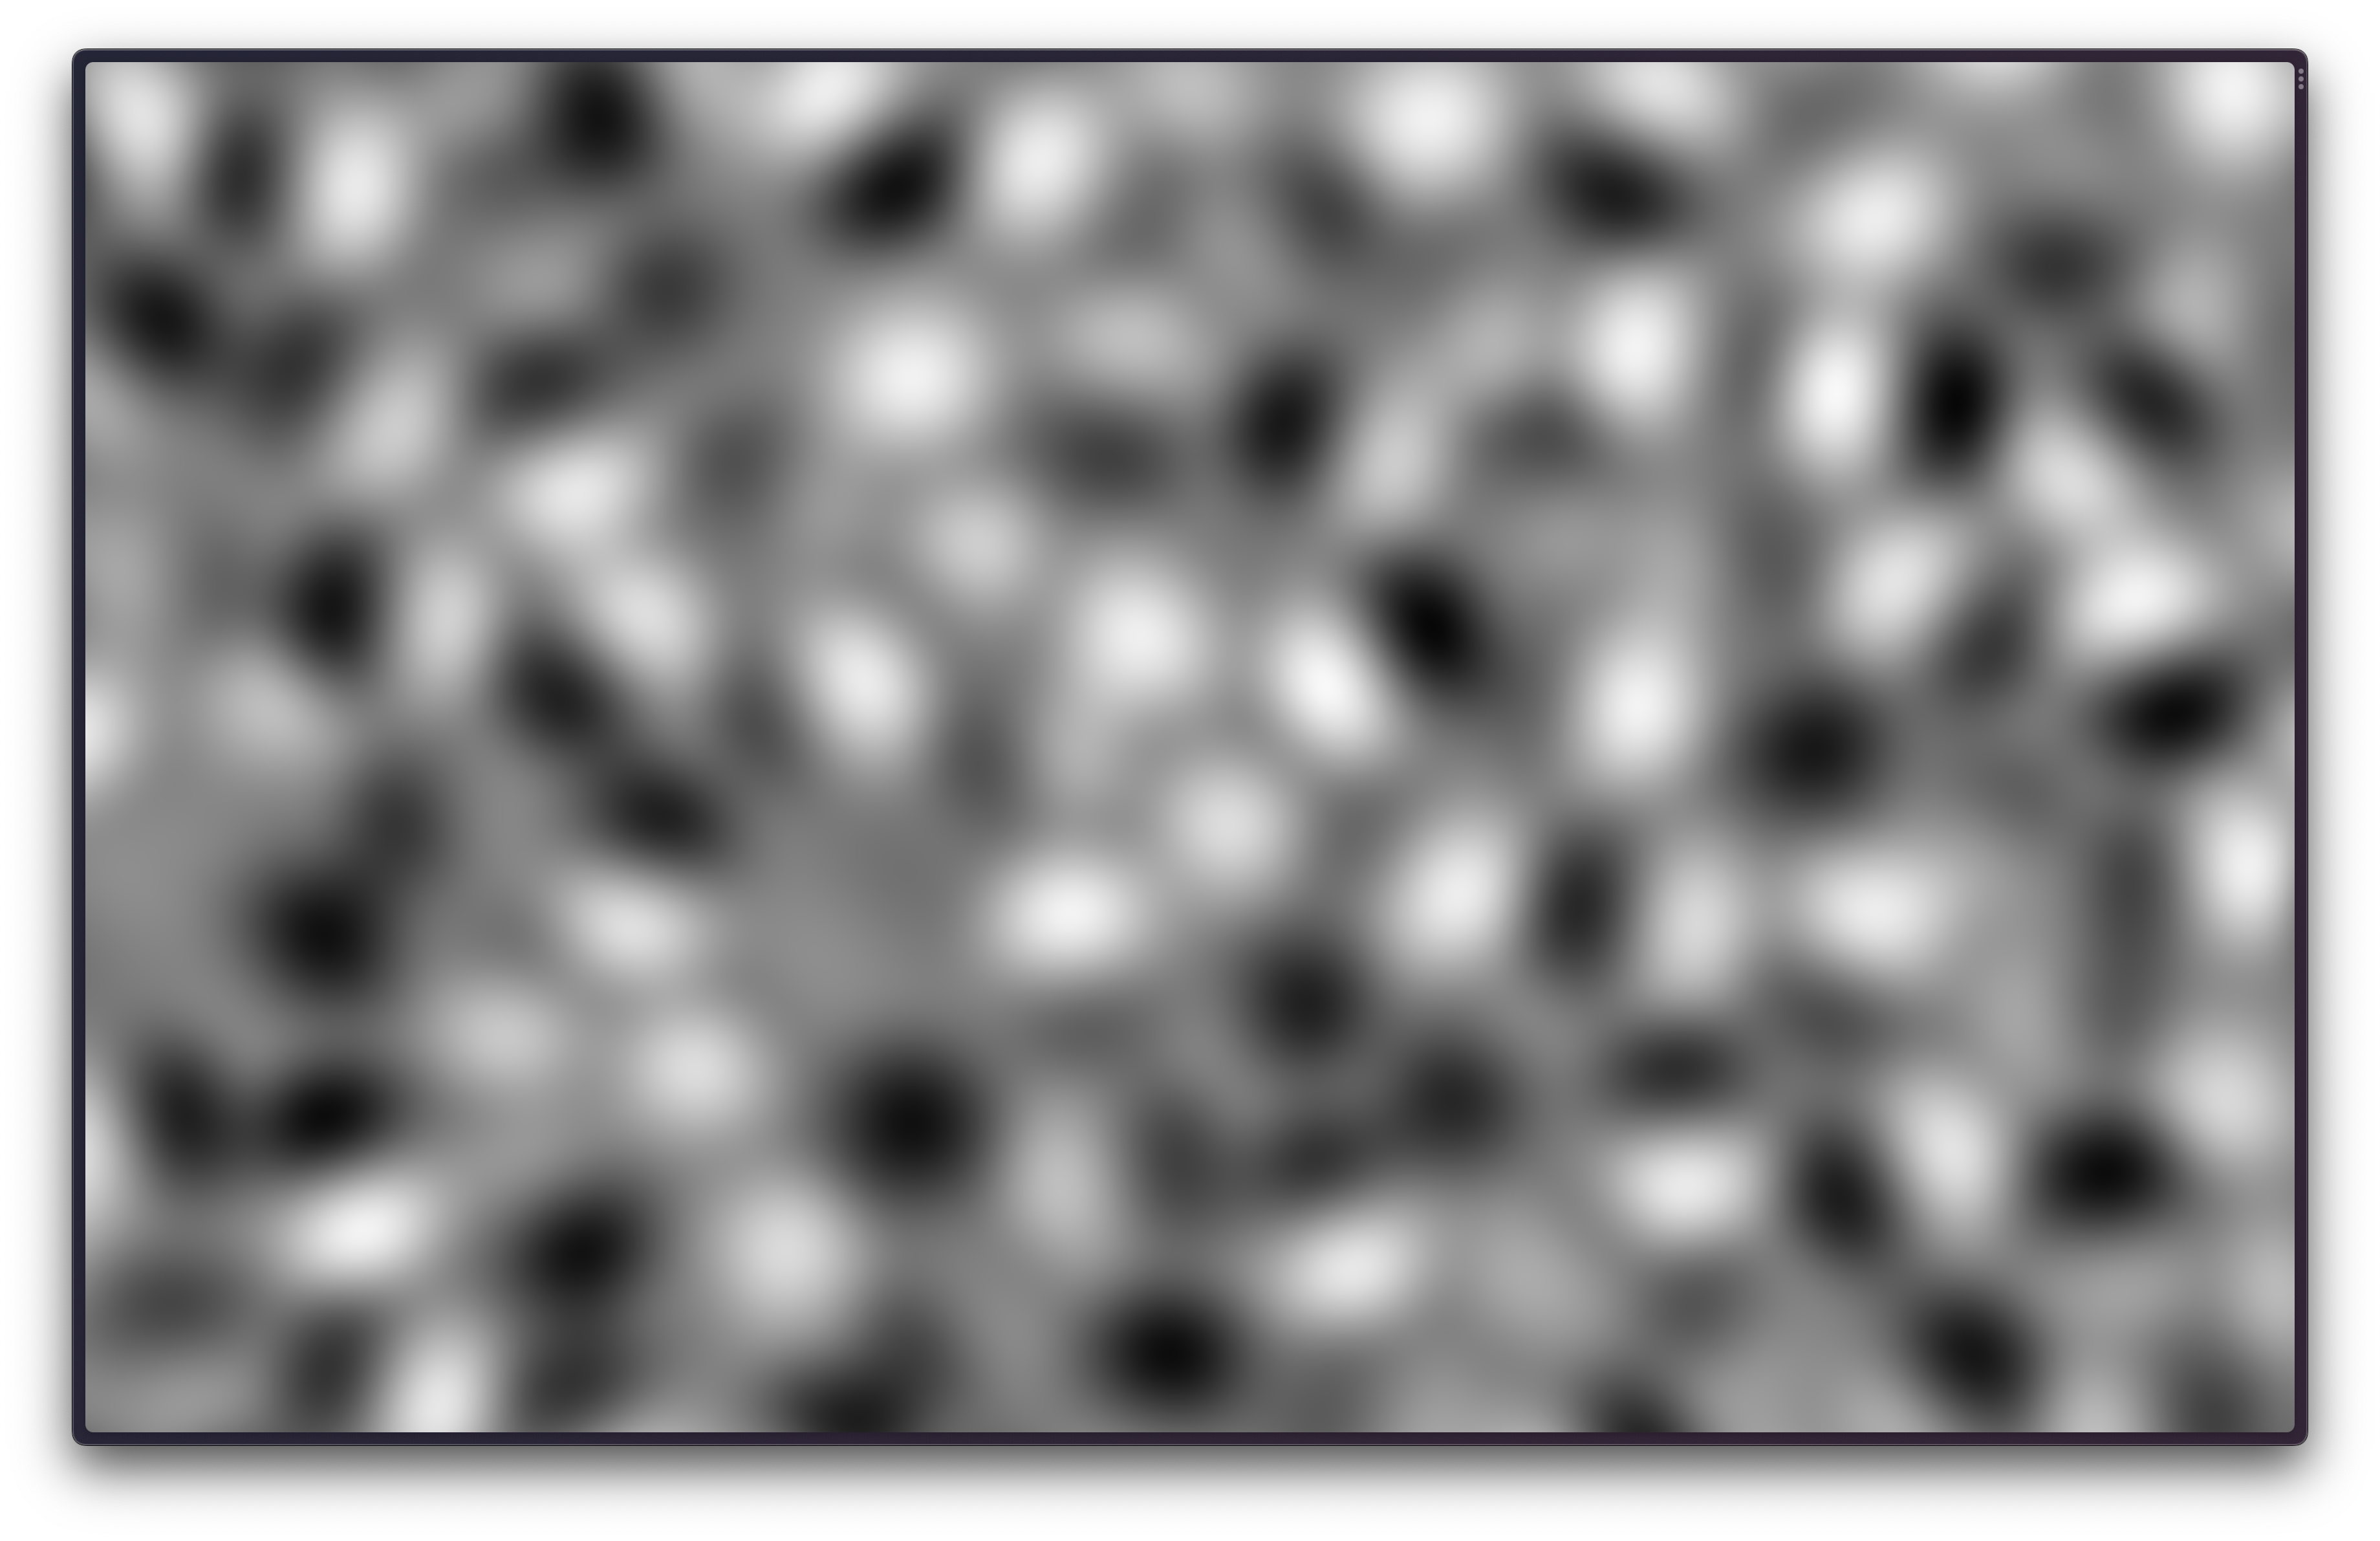 Fragment shader with normalized Perlin noise